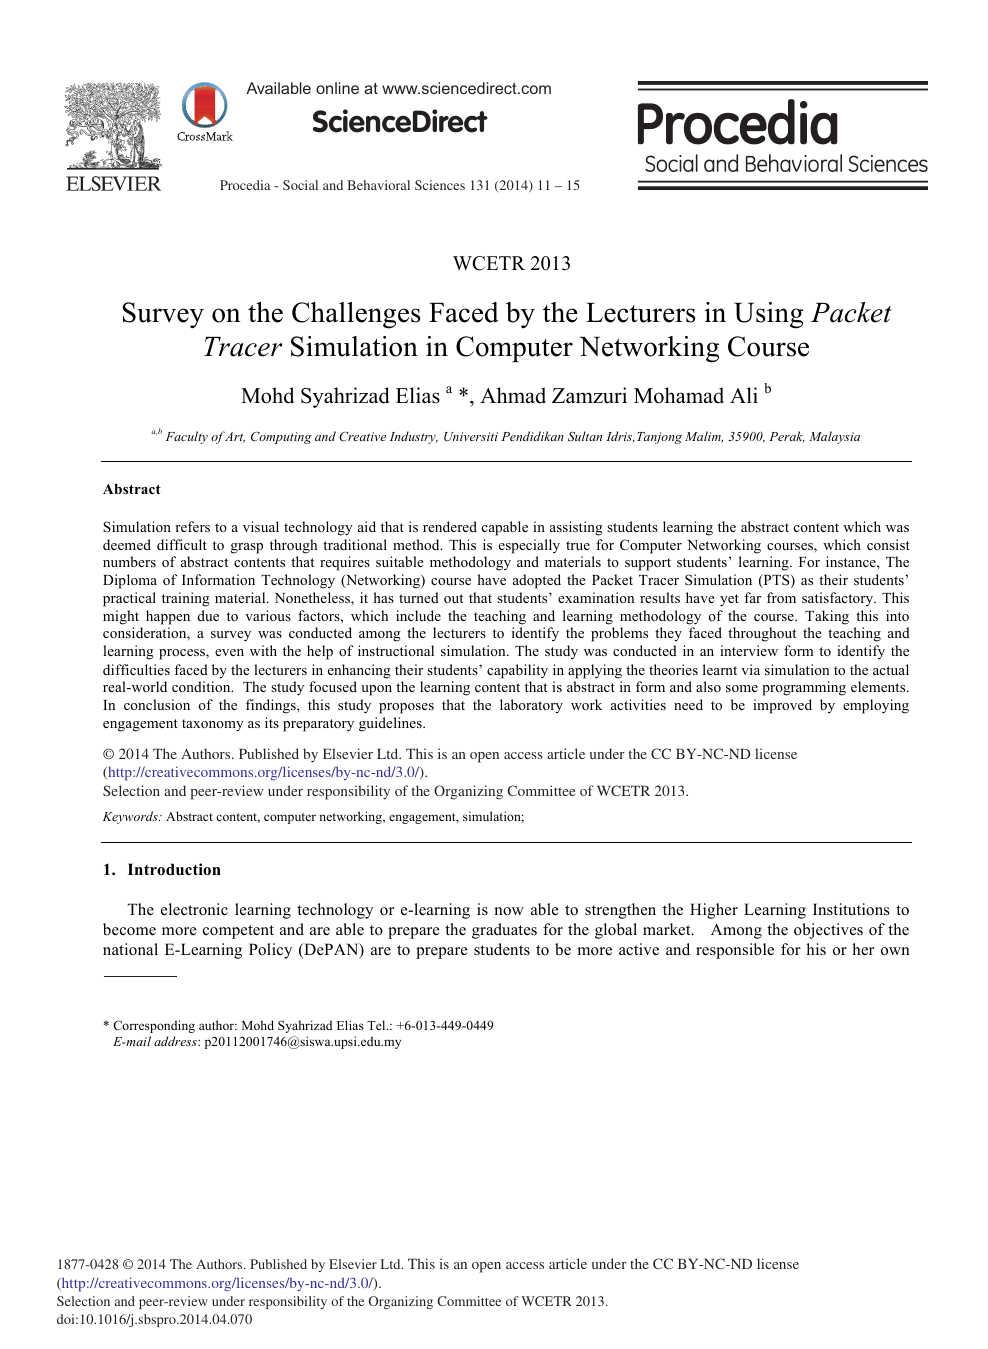 Survey On The Challenges Faced By The Lecturers In Using Packet Tracer Simulation In Computer Networking Course Topic Of Research Paper In Economics And Business Download Scholarly Article Pdf And Read